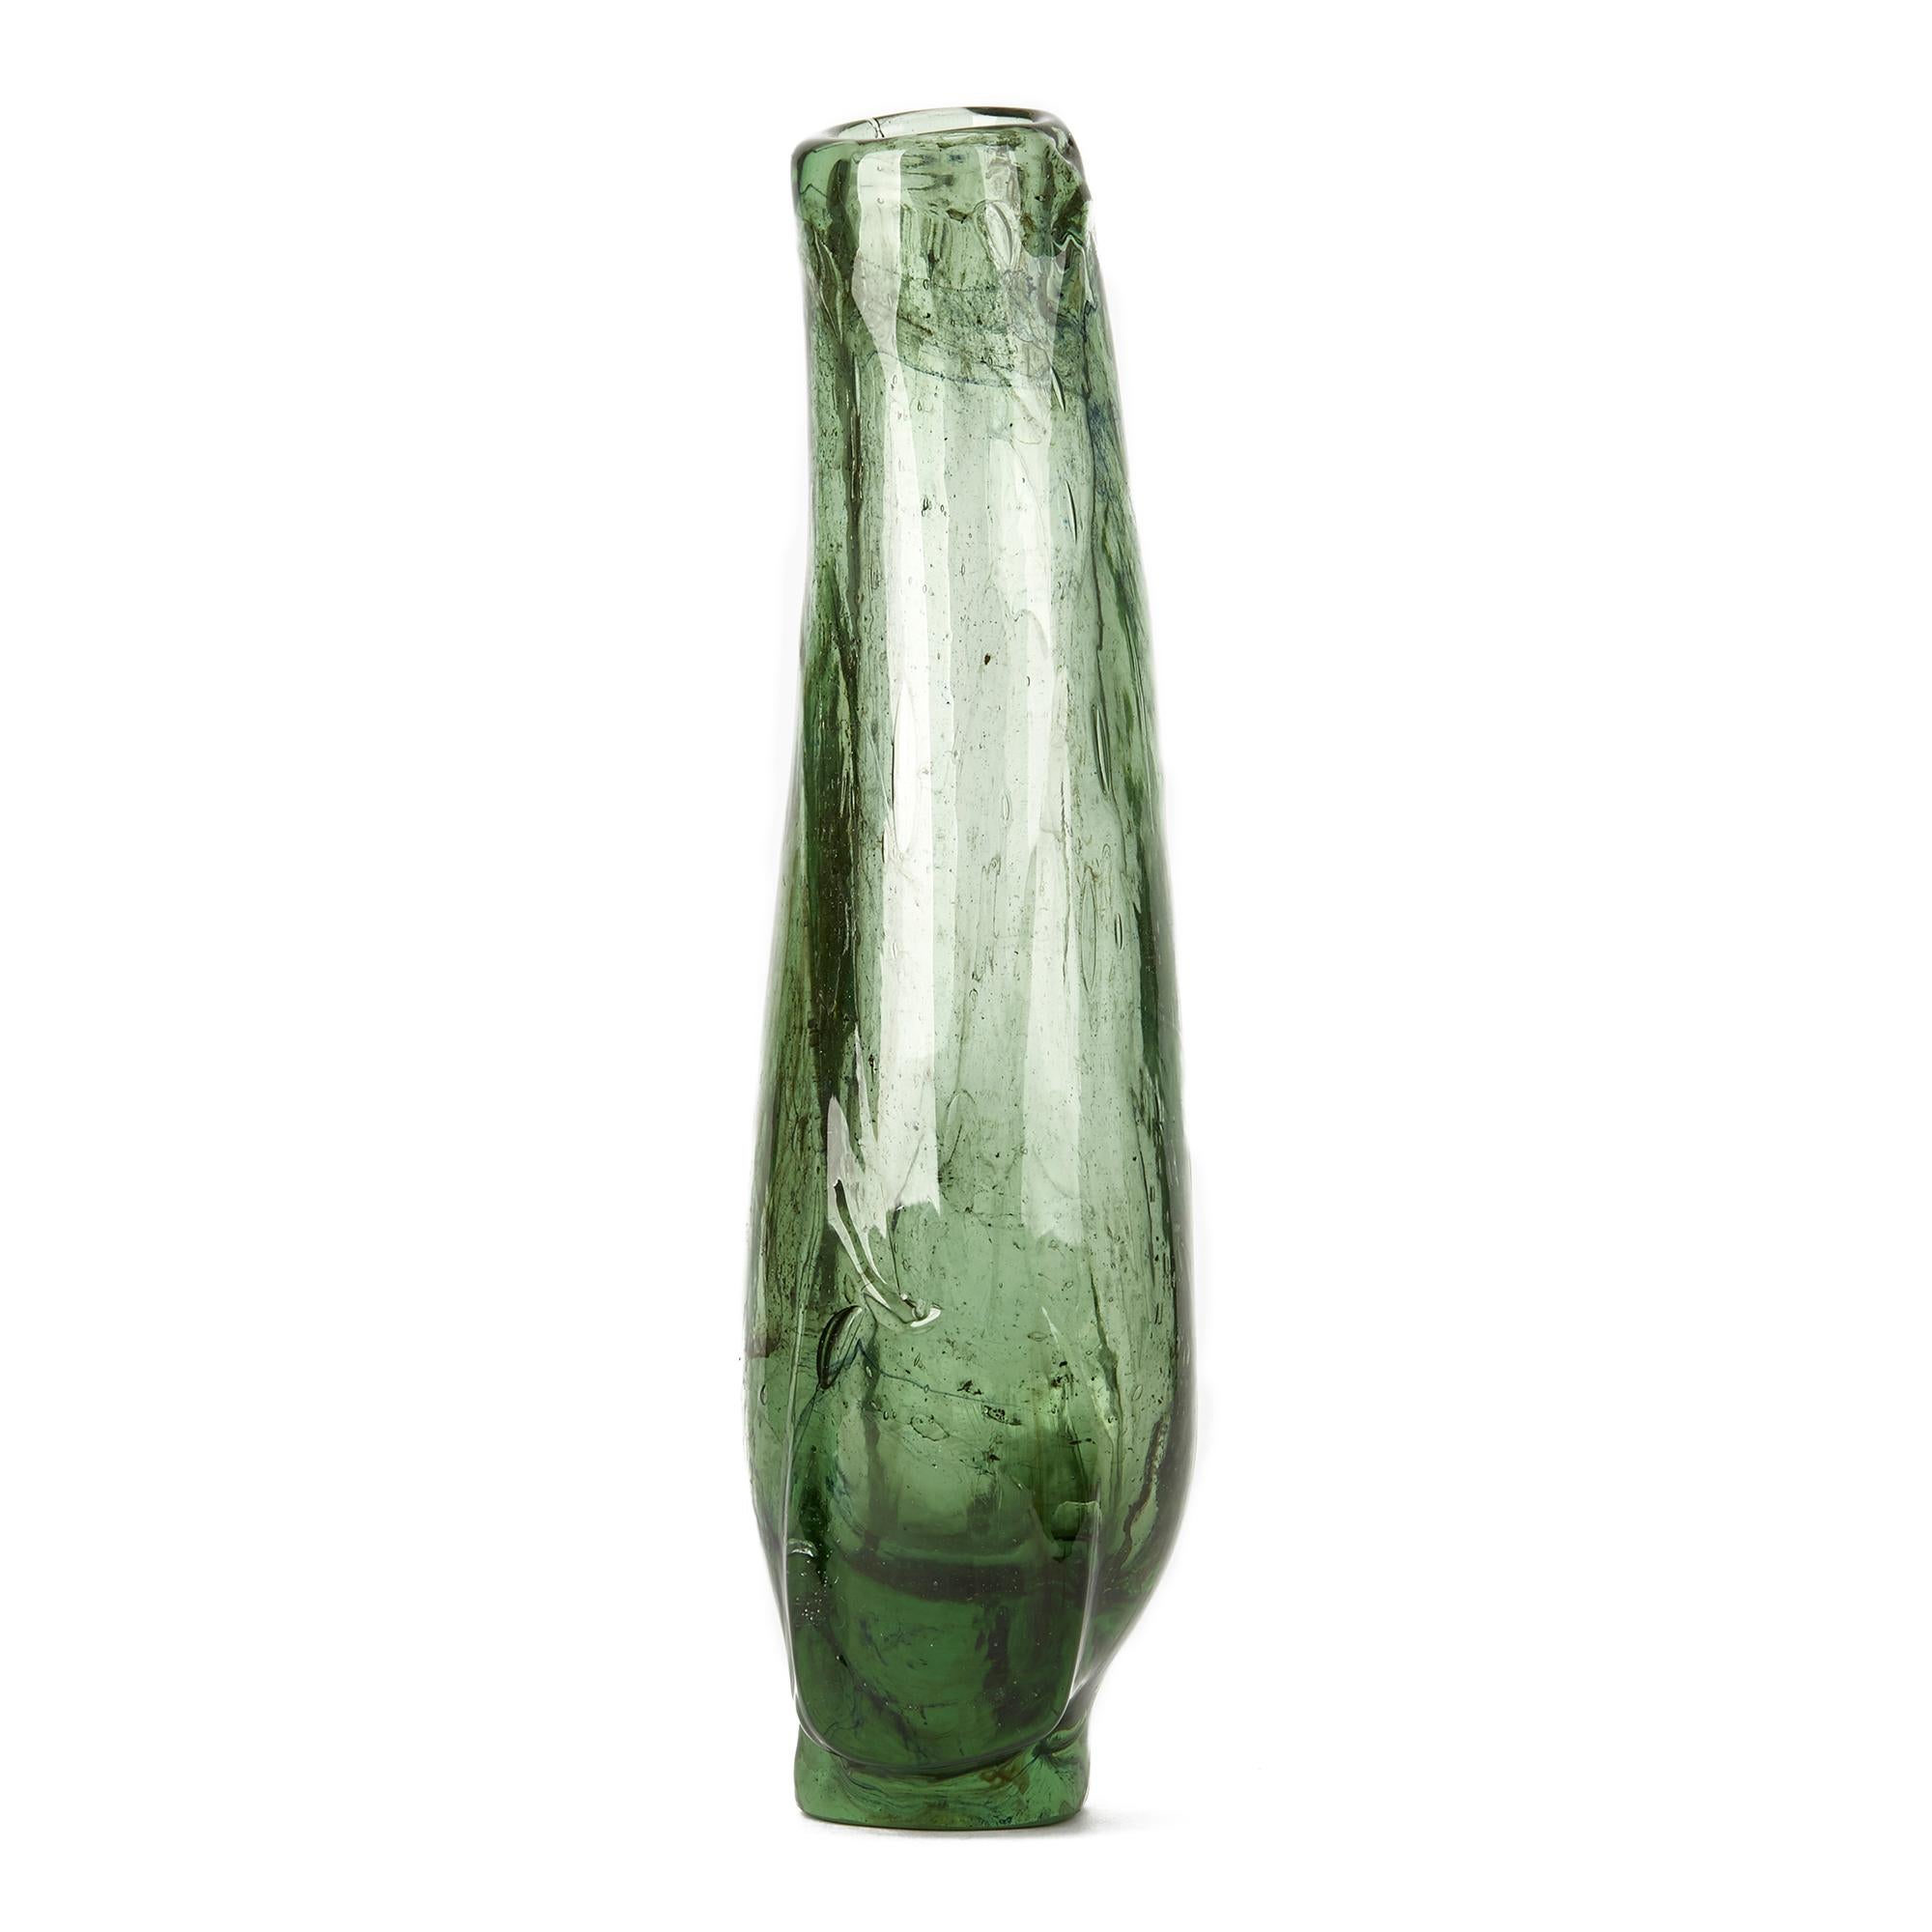 An stylish American art glass vase of tall freeform in shades of green with bubble inclusions by Marvin Lipofsky (1938-2016). The thickly hand blown vase stands on a shaped flat polished base with squared off irregular shaped sides to the lower body